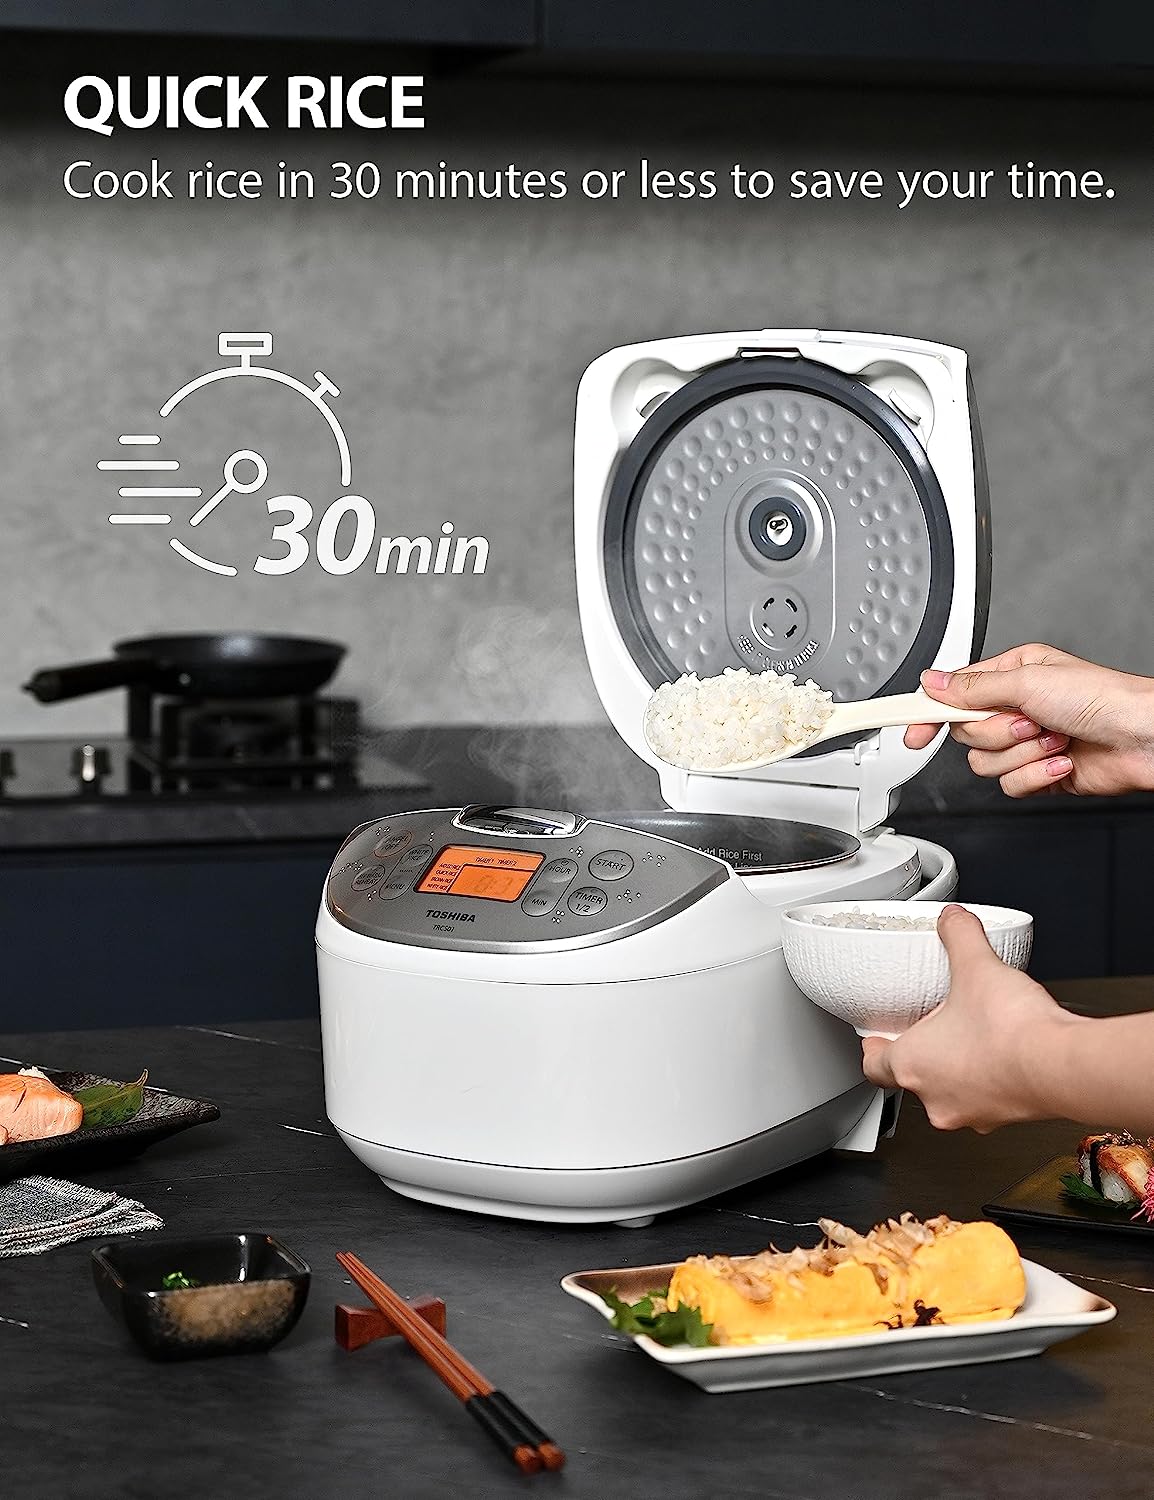 Toshiba Rice Cooker 6 Cup Uncooked – Japanese Rice Cooker with Fuzzy Logic  Technology, 7 Cooking Functions, Digital Display, 2 Delay Timers and Auto